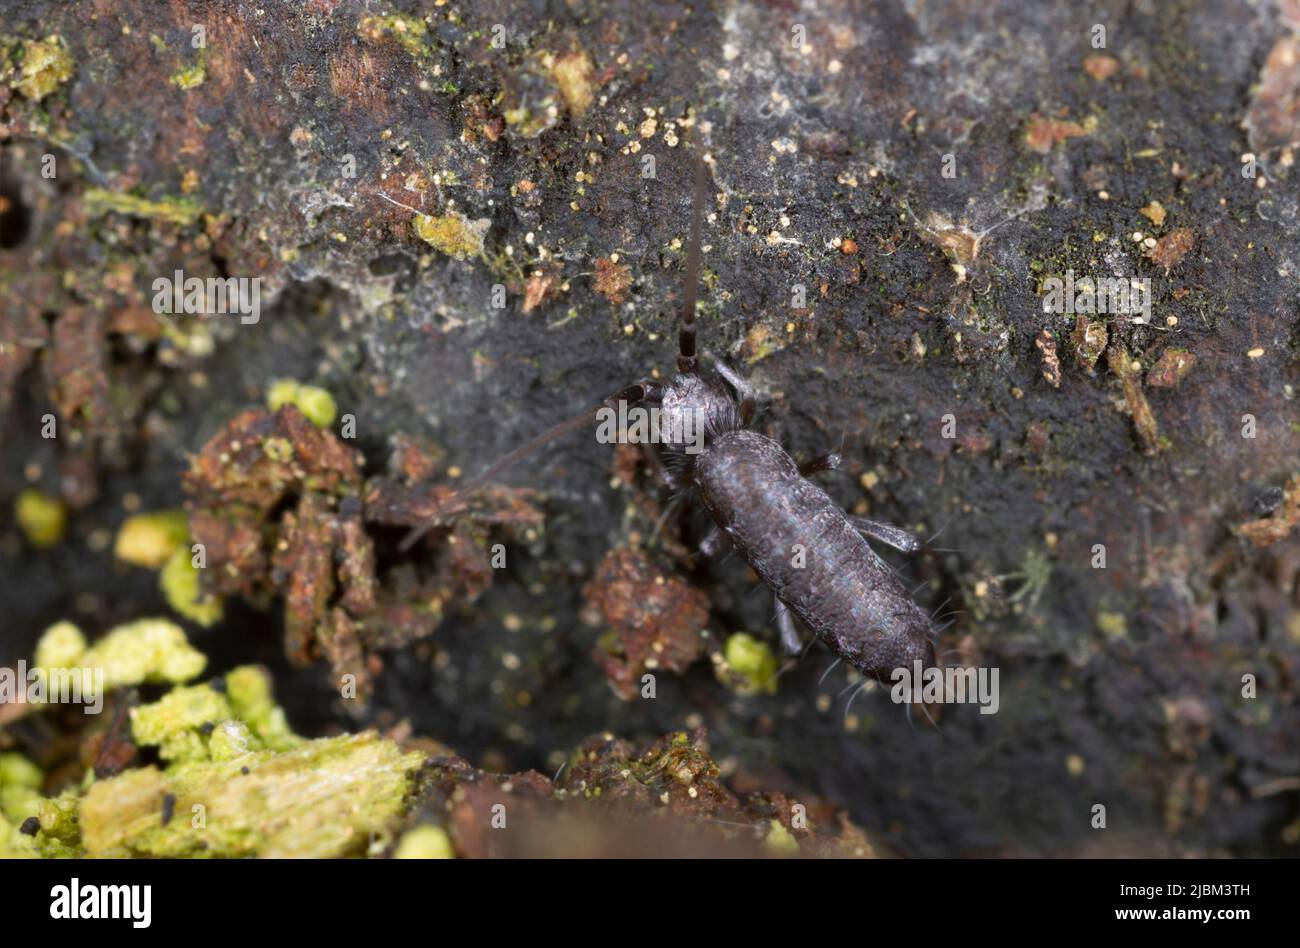 Springtail in natural environment Stock Photo